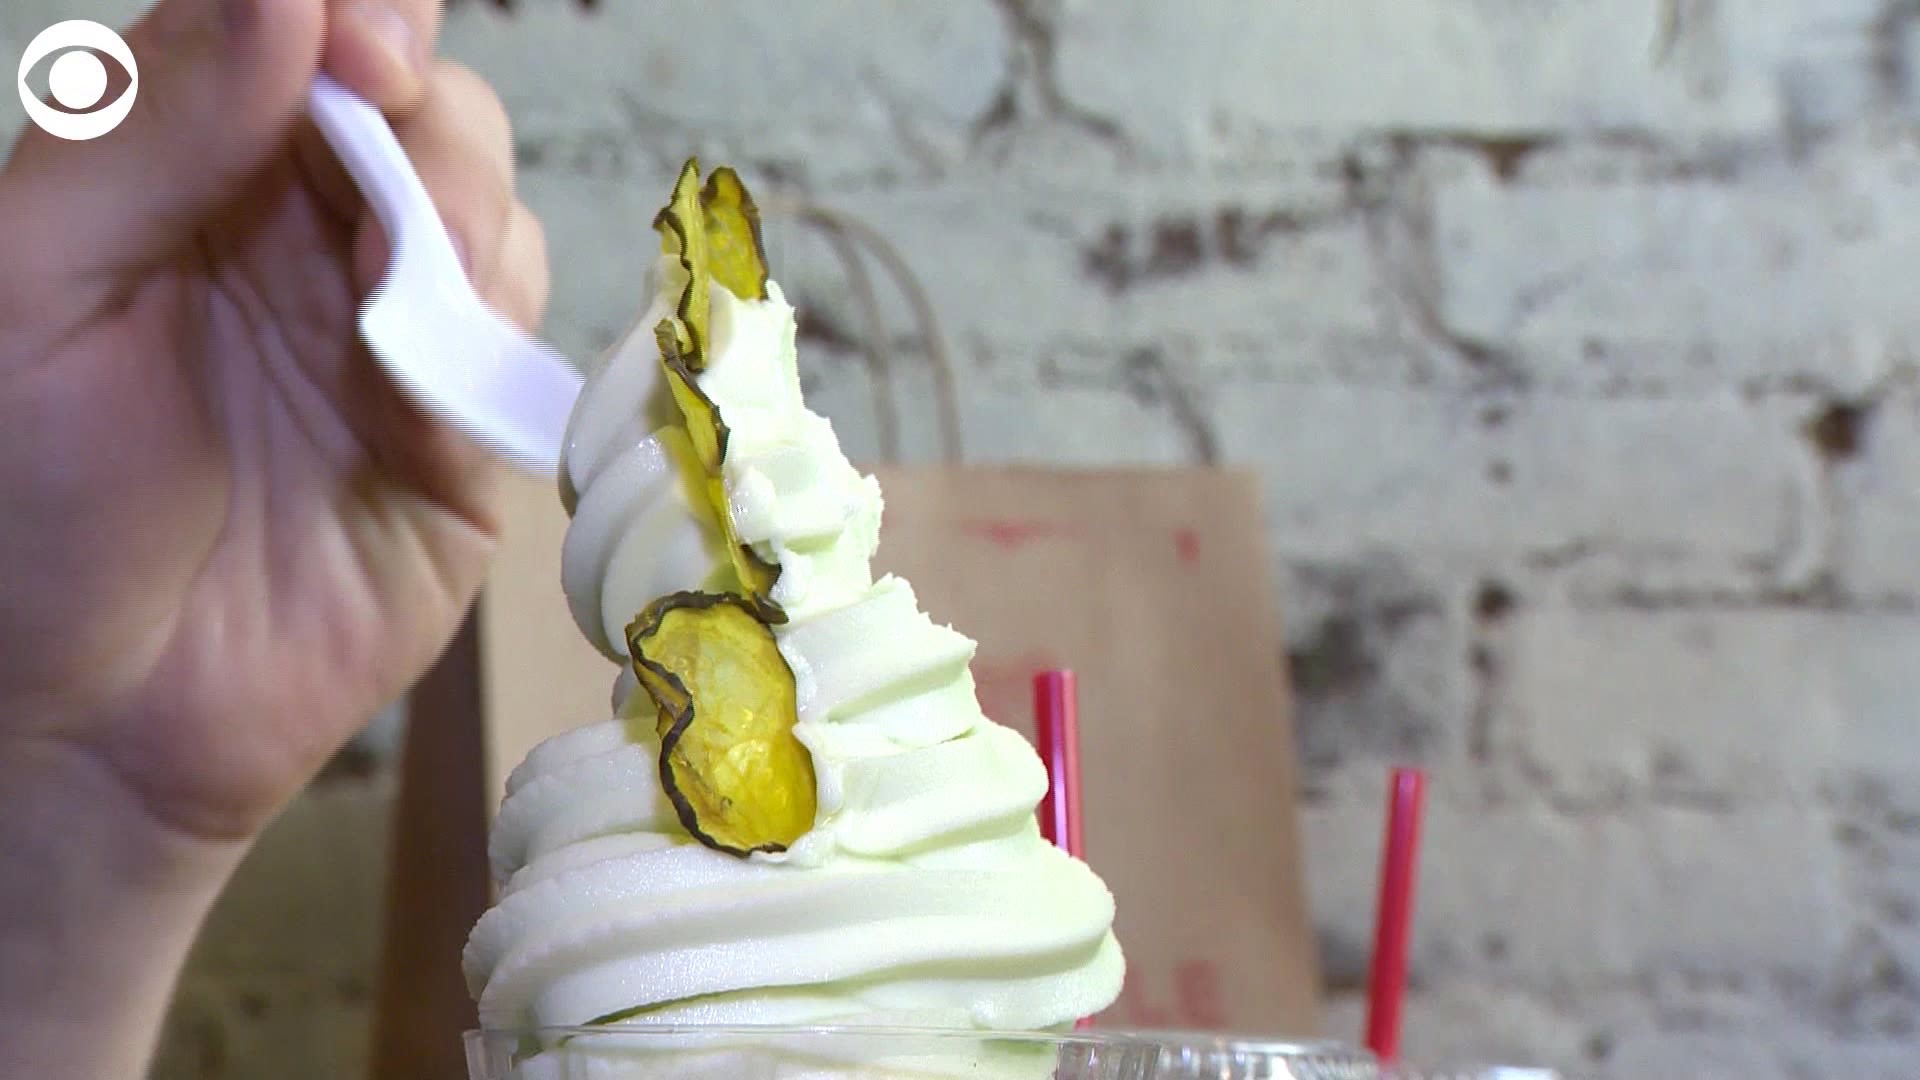 Pickles aren't just for snacking or side dishes anymore. (CBS)